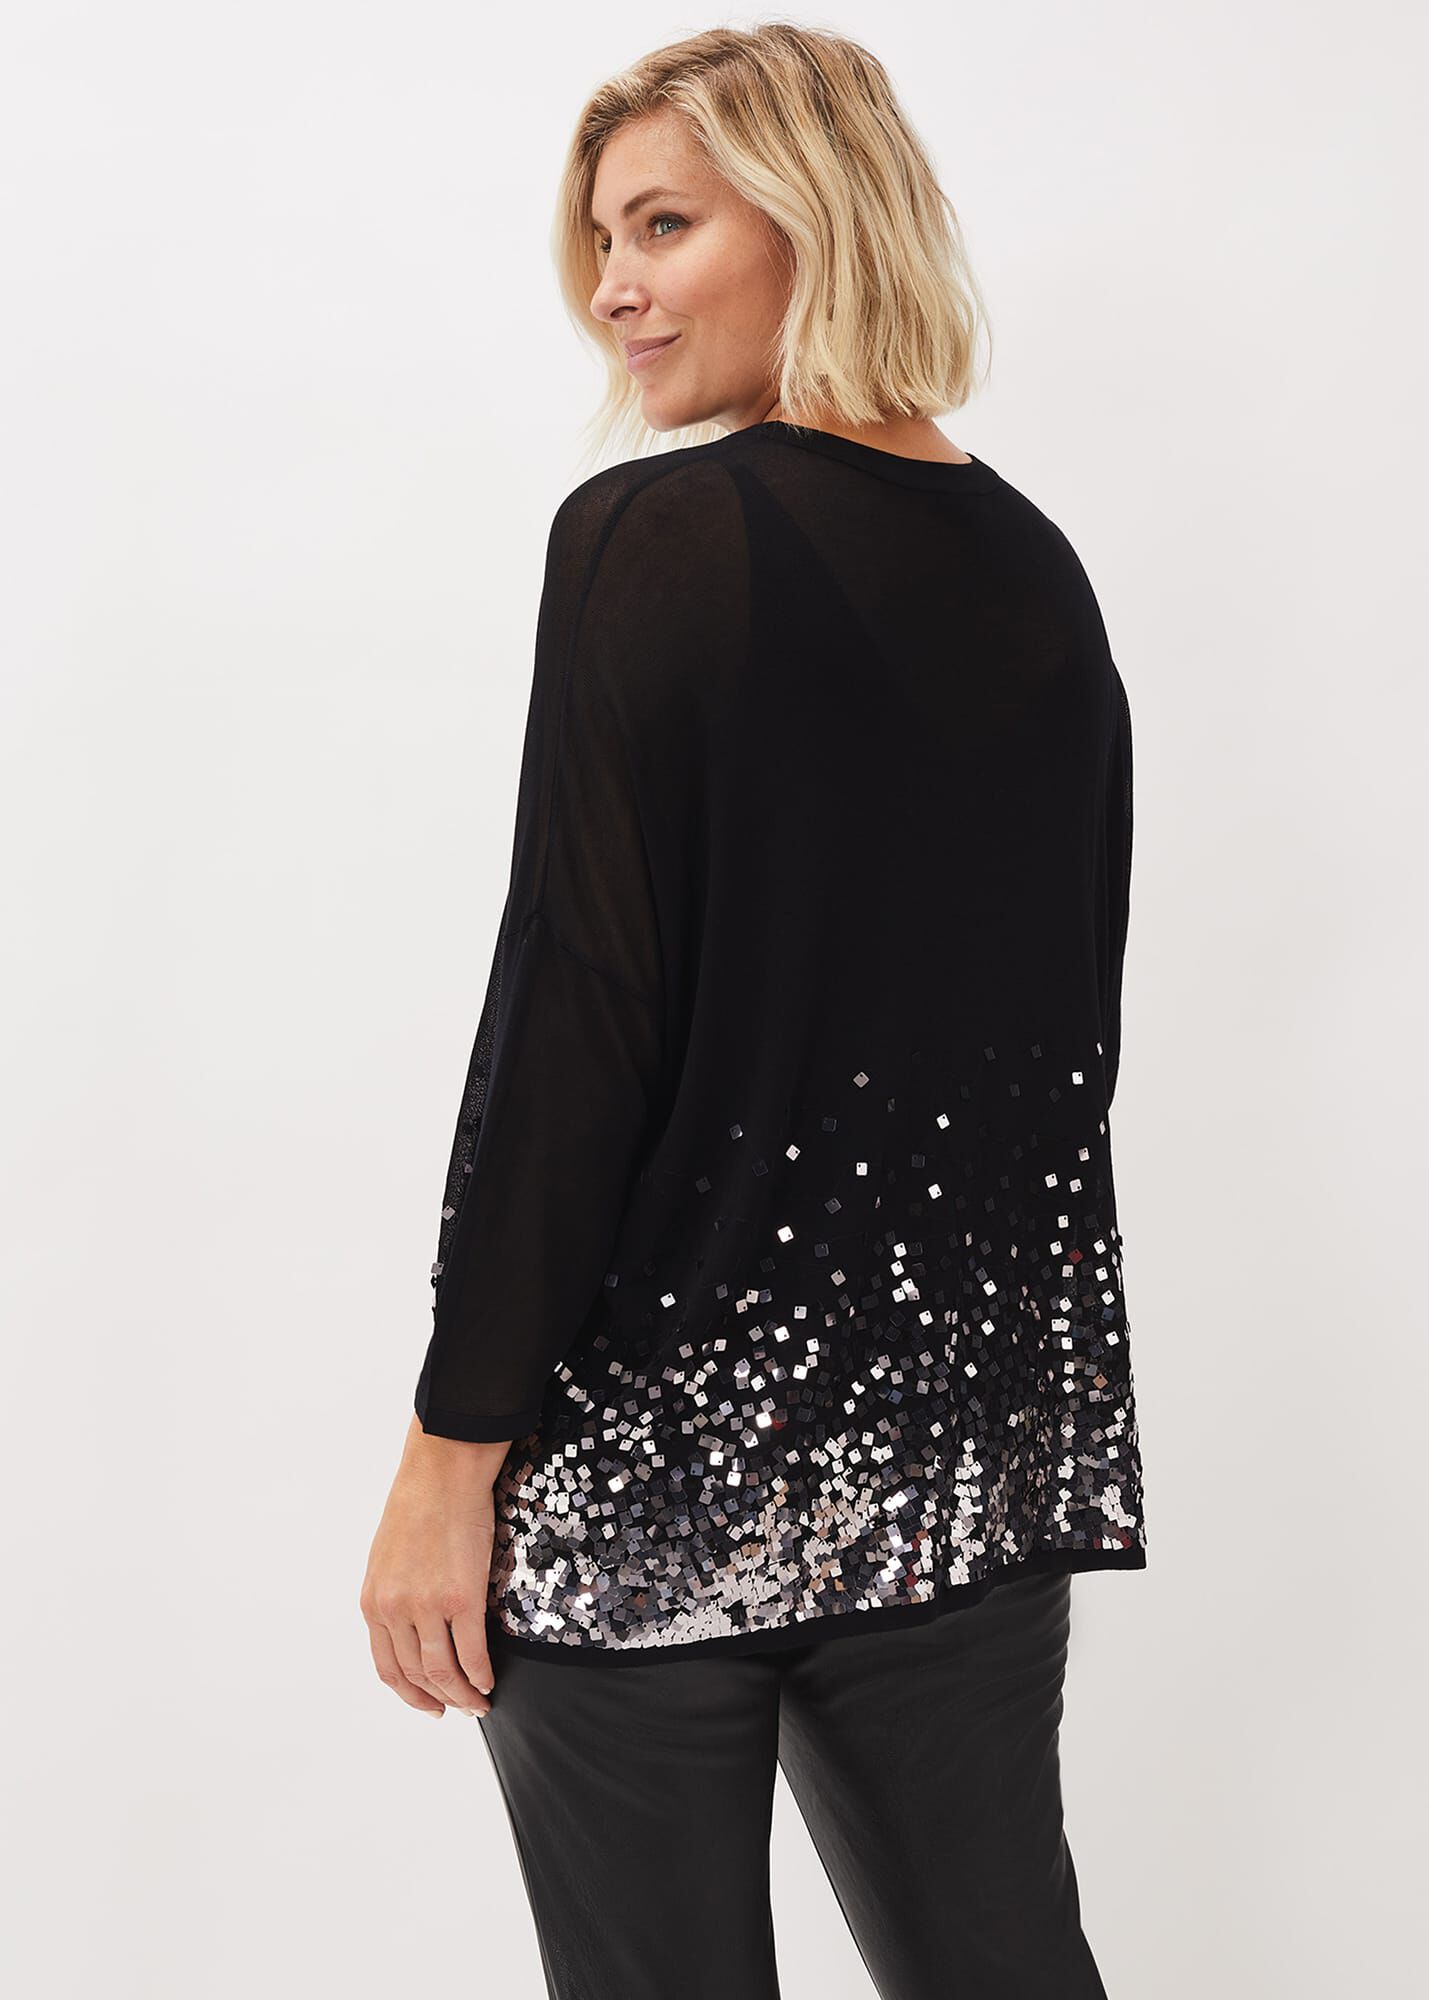 Erela Sequin Knit Top | Phase Eight